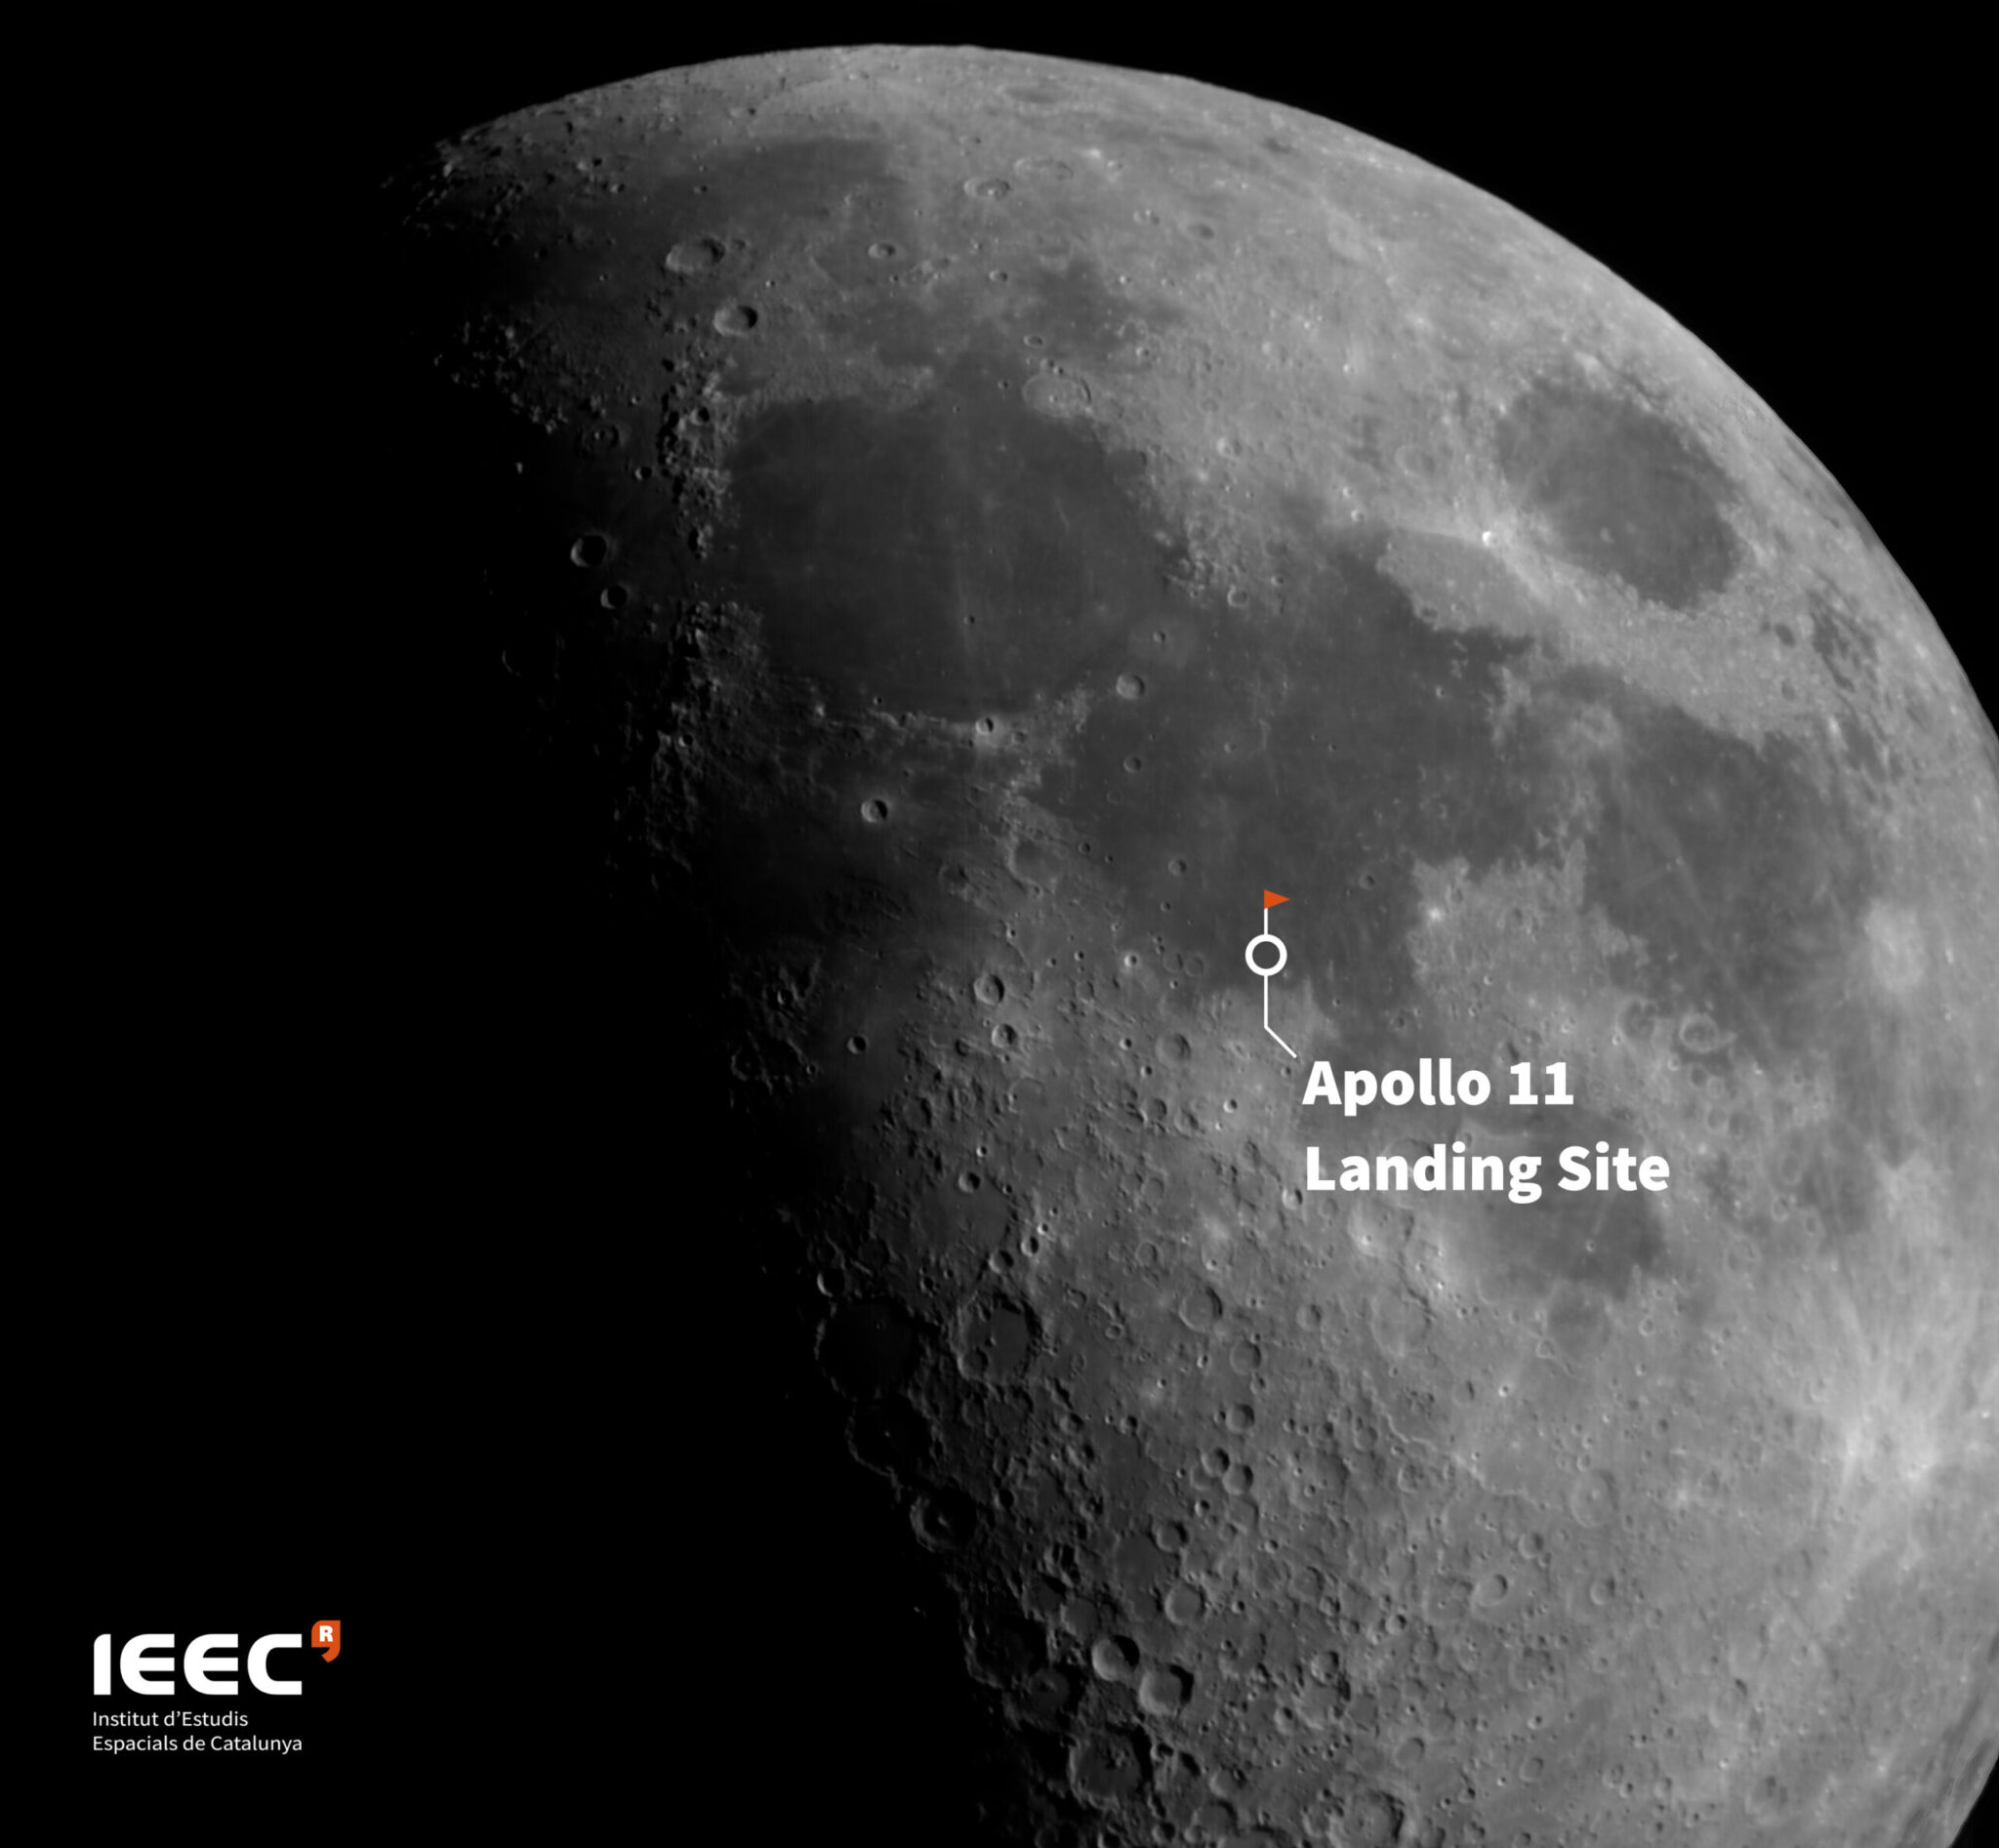 IEEC releases anniversary image of the Moon in celebration of 50 years since humankind set foot on a celestial body